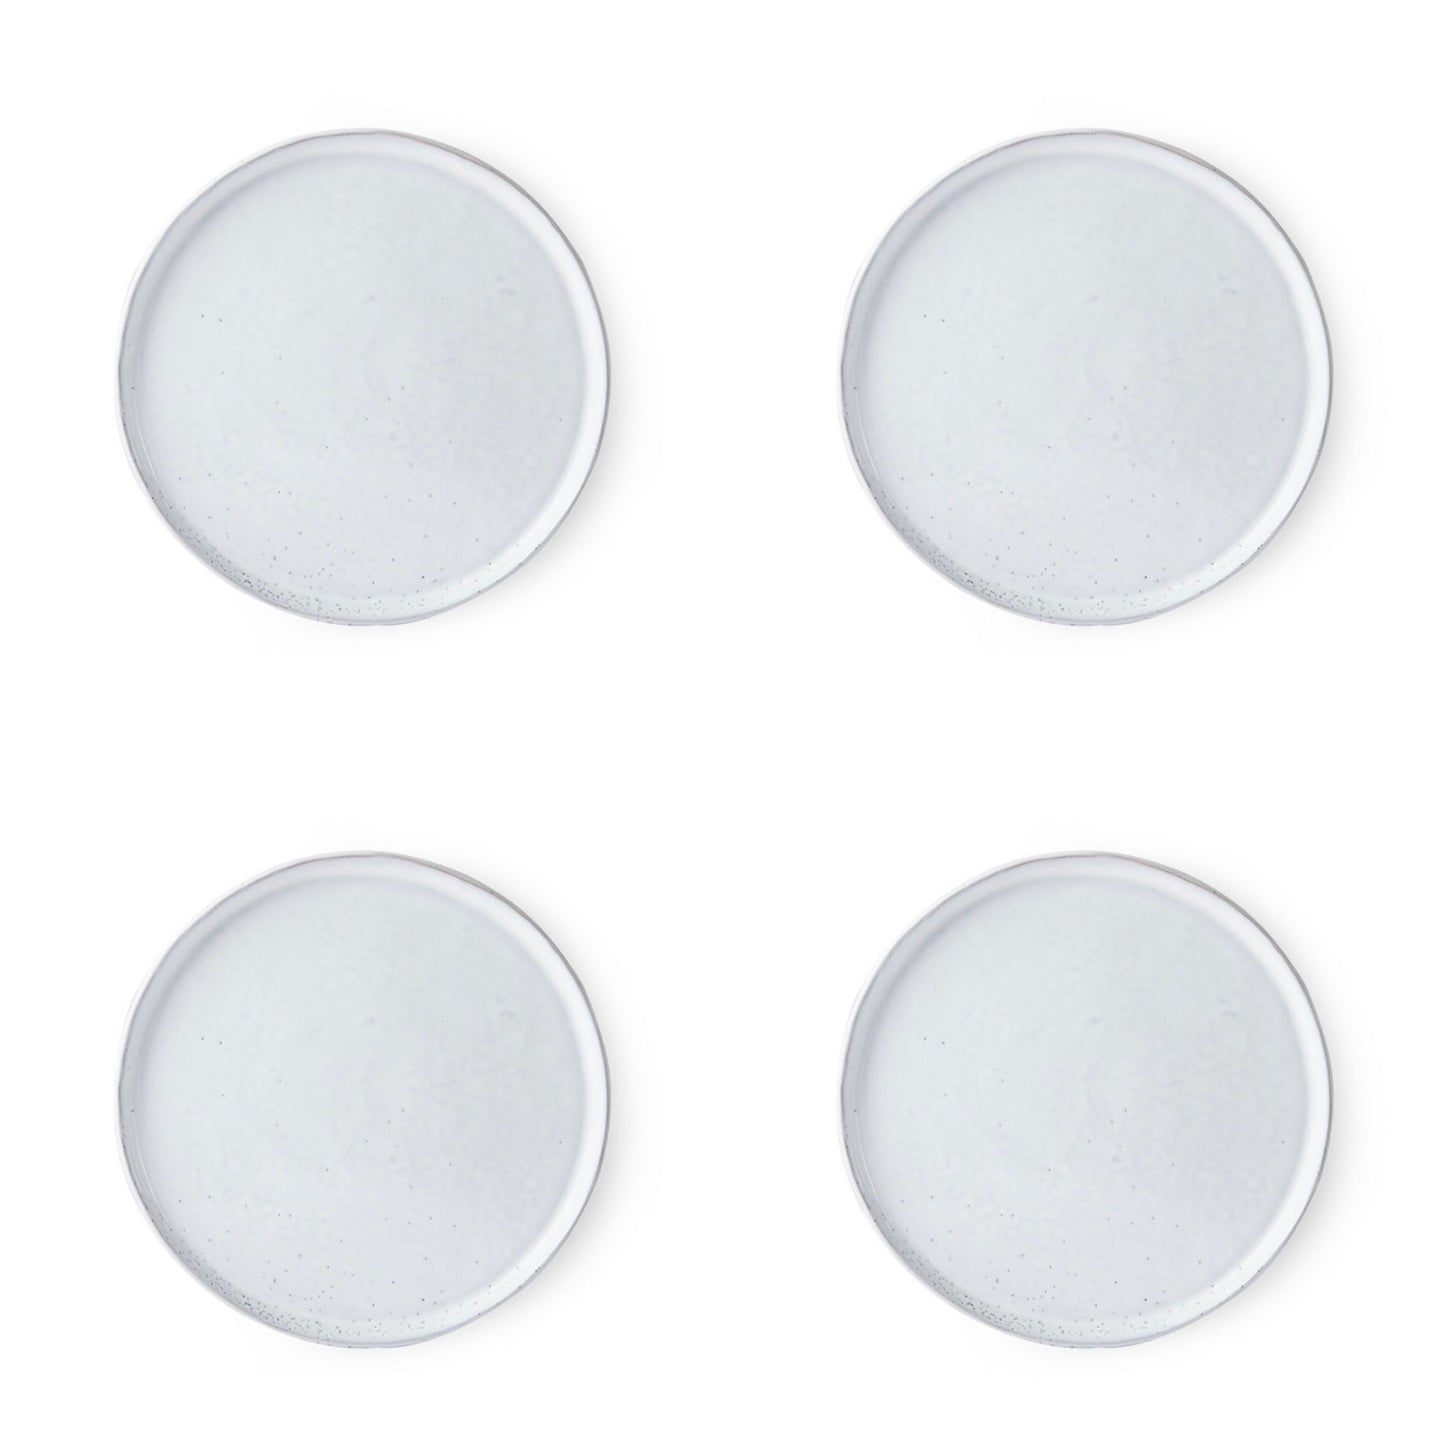 4 white speckled breakfast plates with charcoal undertone